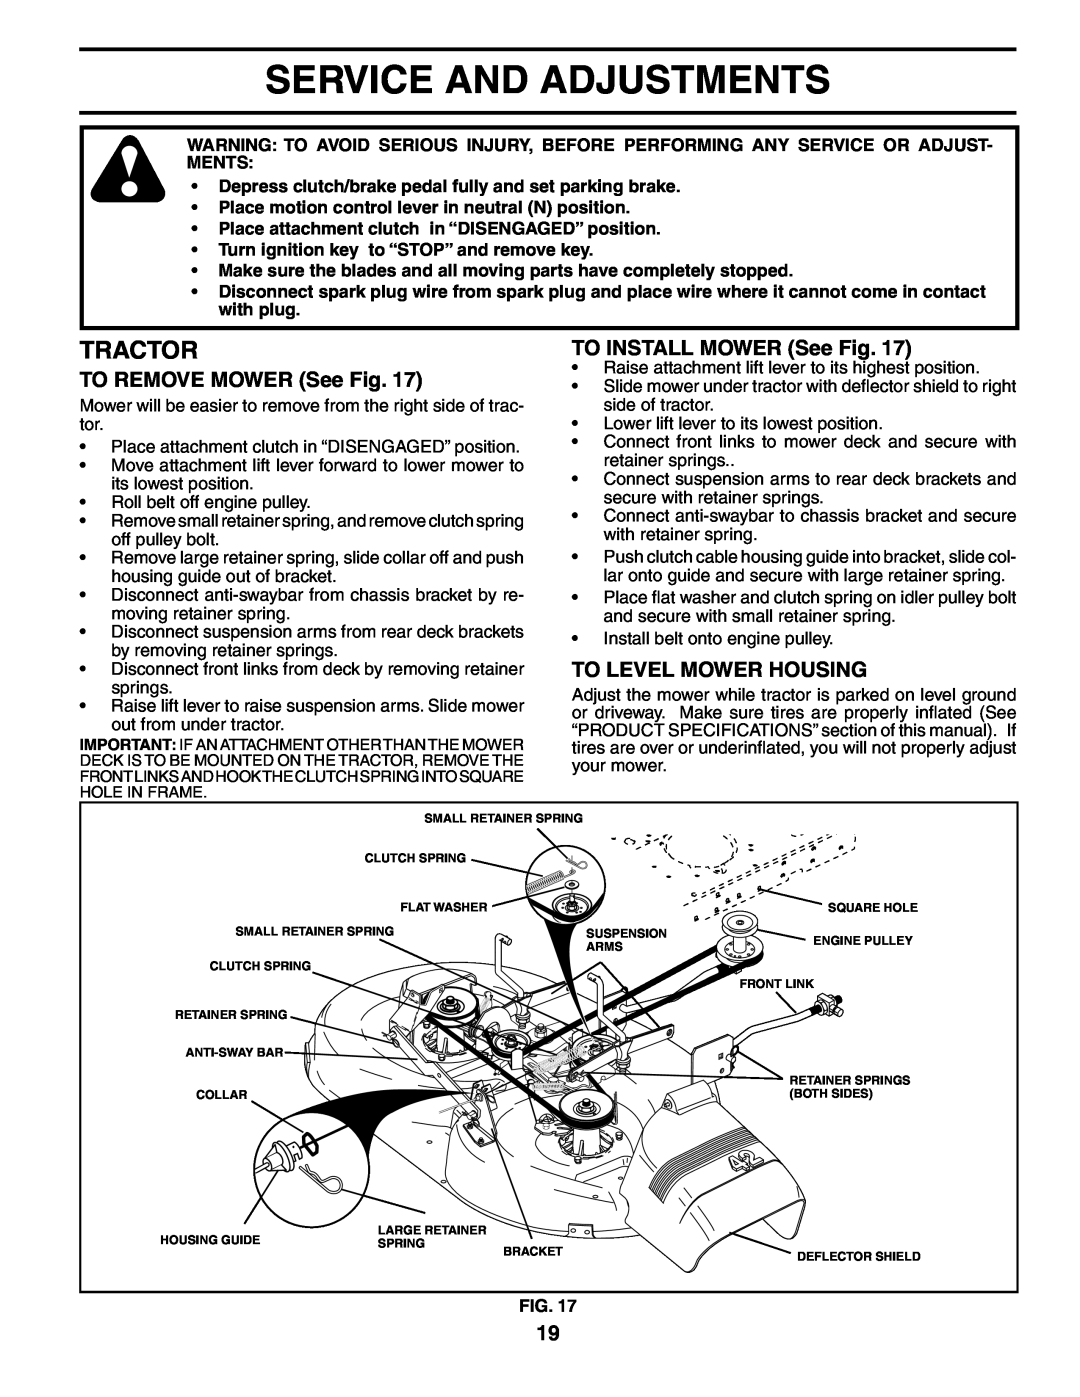 Poulan 184523 Service And Adjustments, TO REMOVE MOWER See Fig, TO INSTALL MOWER See Fig, To Level Mower Housing, Tractor 